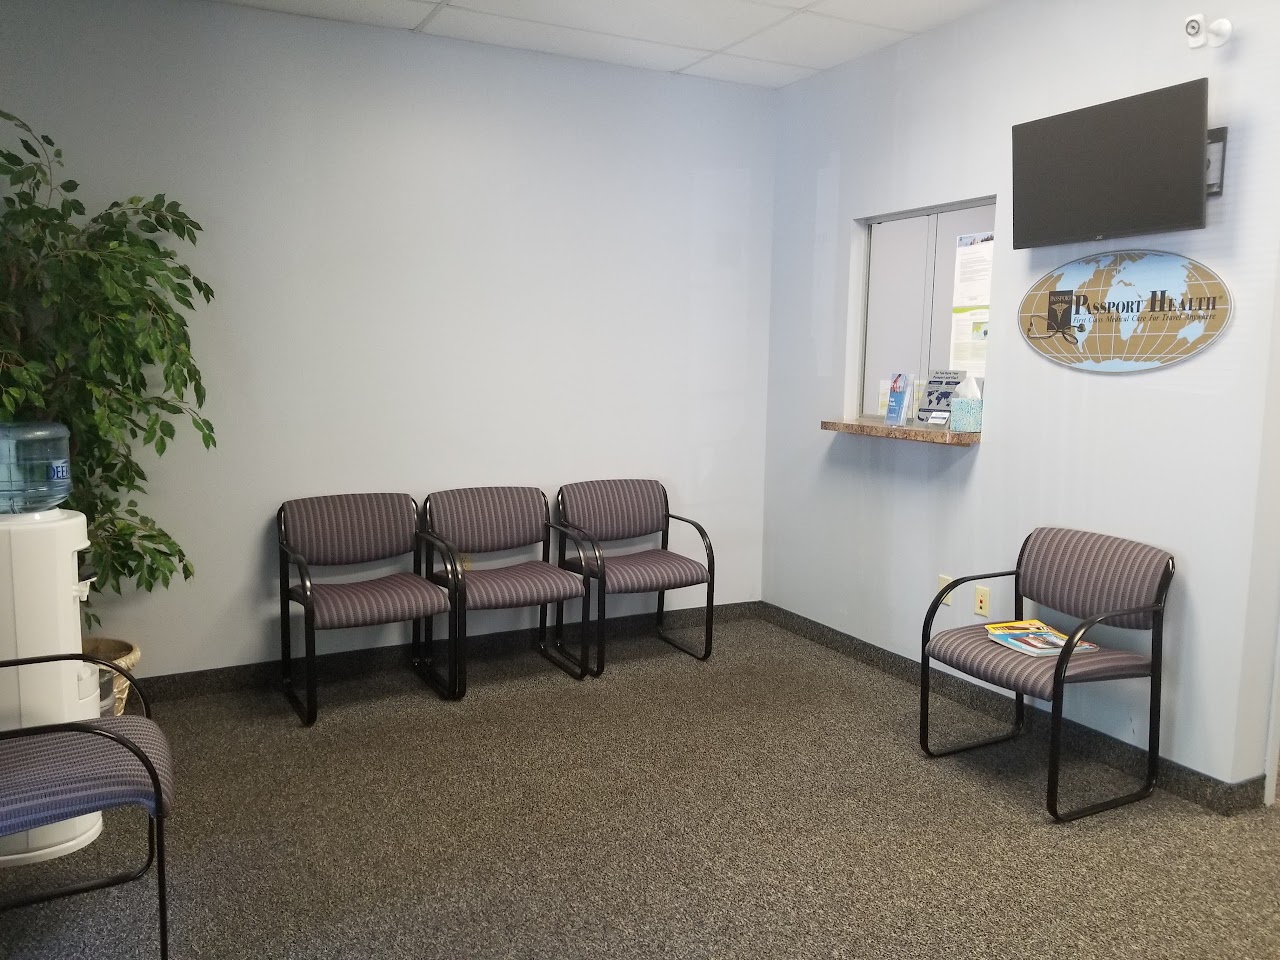 Photo of Passport Health Lawrenceville COVID Testing at Franklin Corner Rd, Lawrence Township, NJ 08648, USA